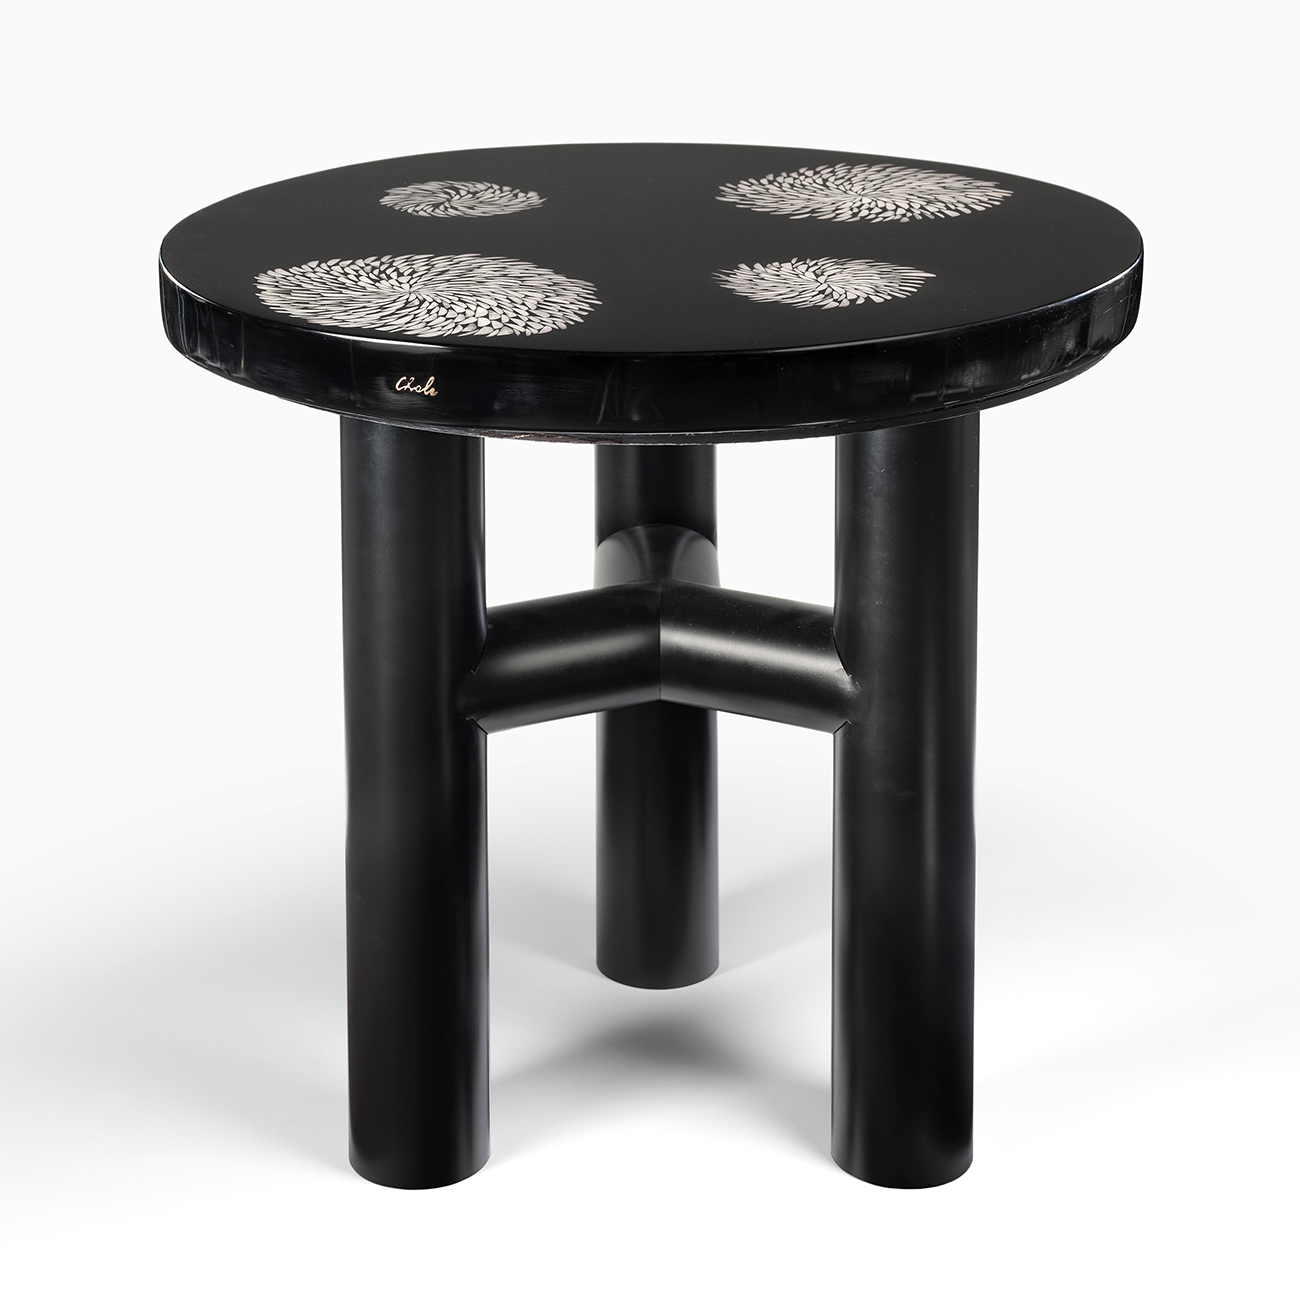 Circular high pedestal table in black resin by Ado Chale - 03